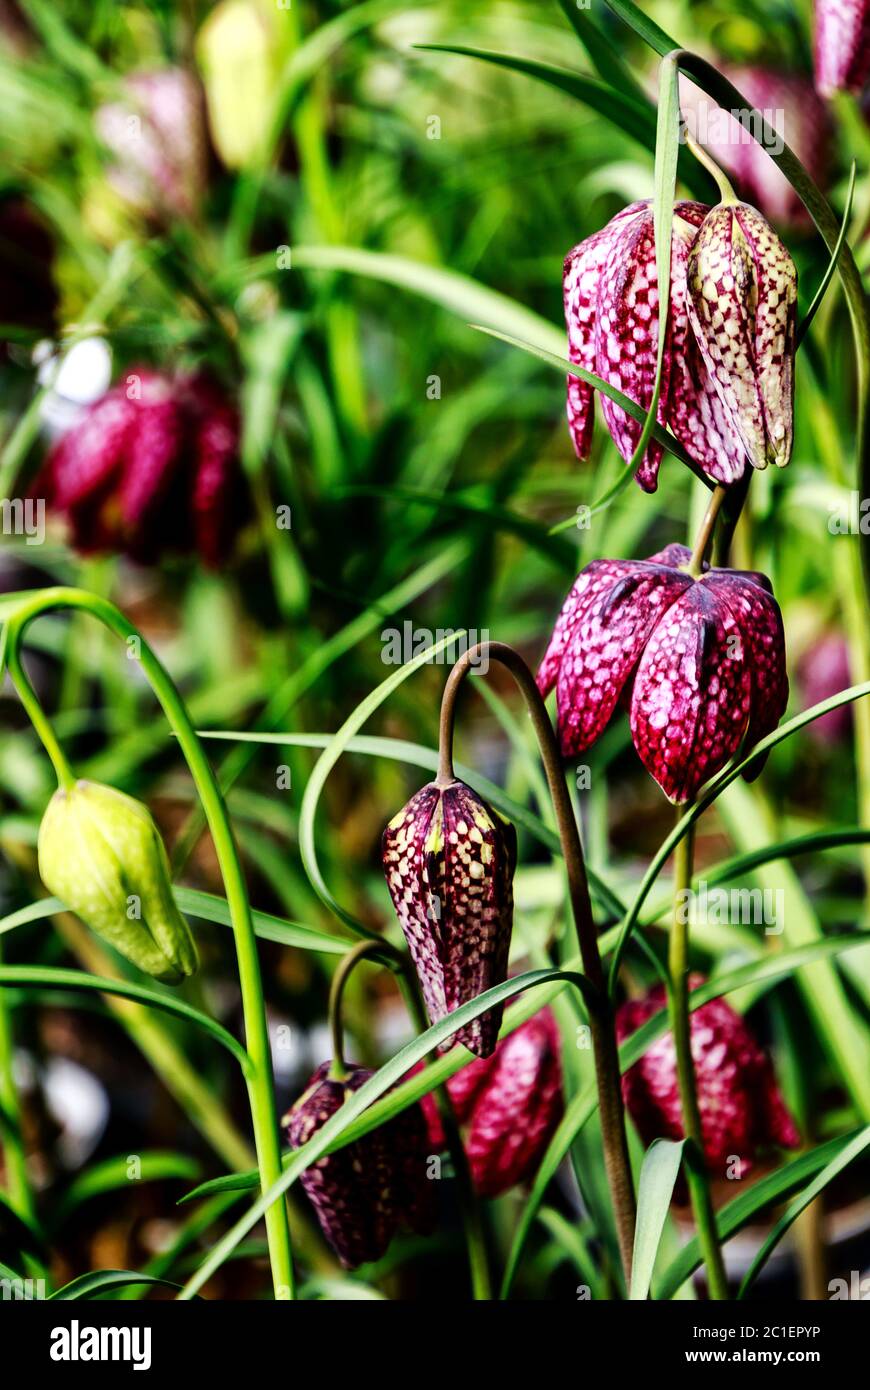 Guinea Hen Flower or Snake's Head - Fritillaria meleagris flowers with unique dainty chequered bell shaped flowers. Stock Photo